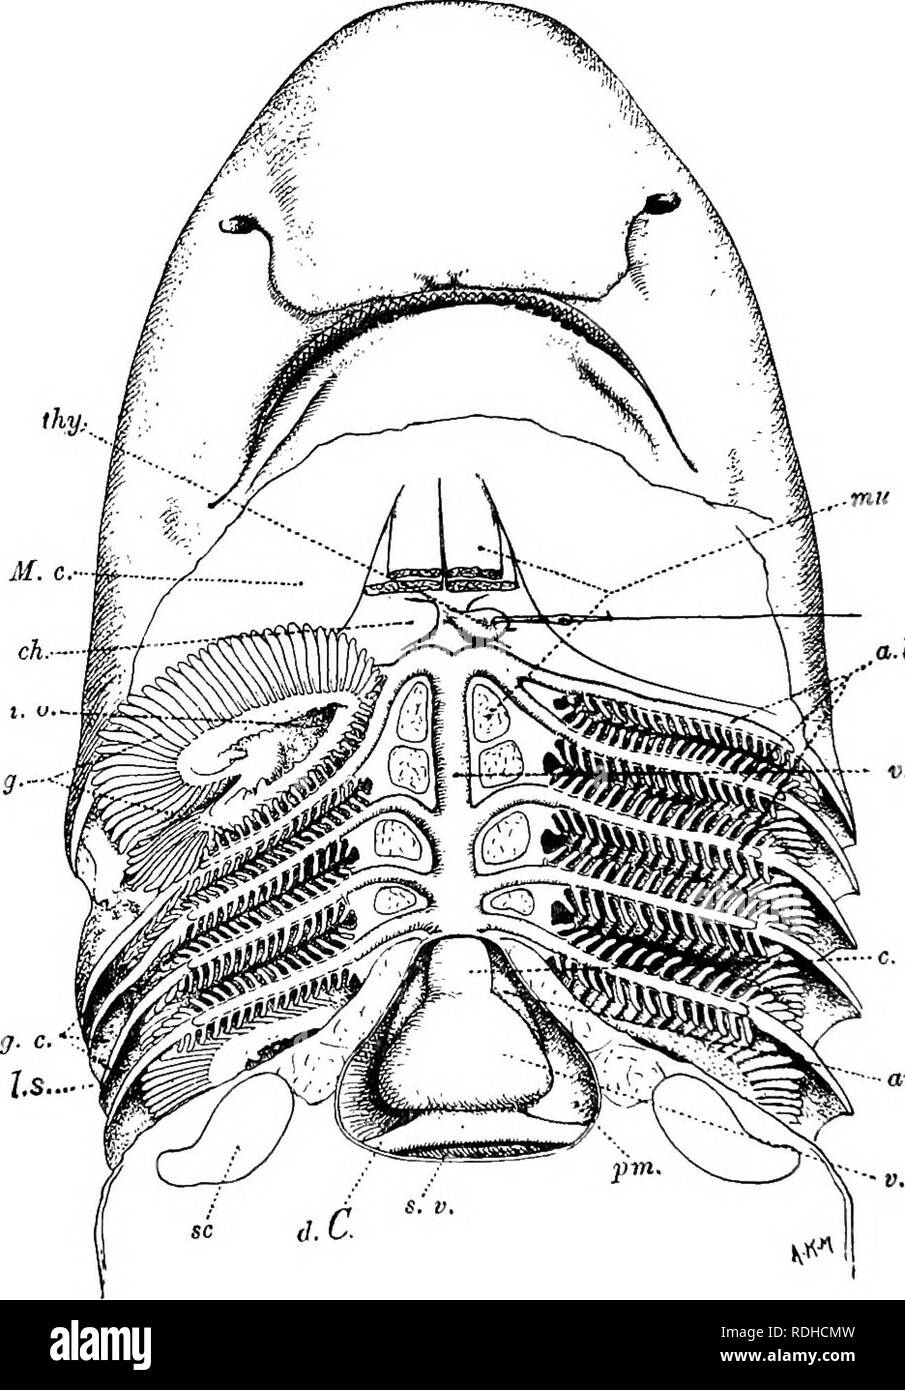 . A manual of elementary zoology . Zoology. 358 MANUAL OF ELEMENTARY ZOOLOGY. a-b.a. Fig. 257.—The forepart^of the body of a dogfish, dissected to show the heart and ventral arterial system. a.,/&gt;,a.f Afferent branchial arteries; au., auricle; c.a., conus arteriosus; c/t., cera- tohyal cartilage; d.C, ductus Cuvieri; jg-., gills; ^.c. gill clefts; 1.0., internal opening of the first gill cleft; l.s,, line of section in Fig, 268, which should he compared; M.c.t Meckel's cartilage; ?««., muscles from coracoid  region of shoulder girdle to various parts of visceral skeleton;  /»*., pericardium Stock Photo